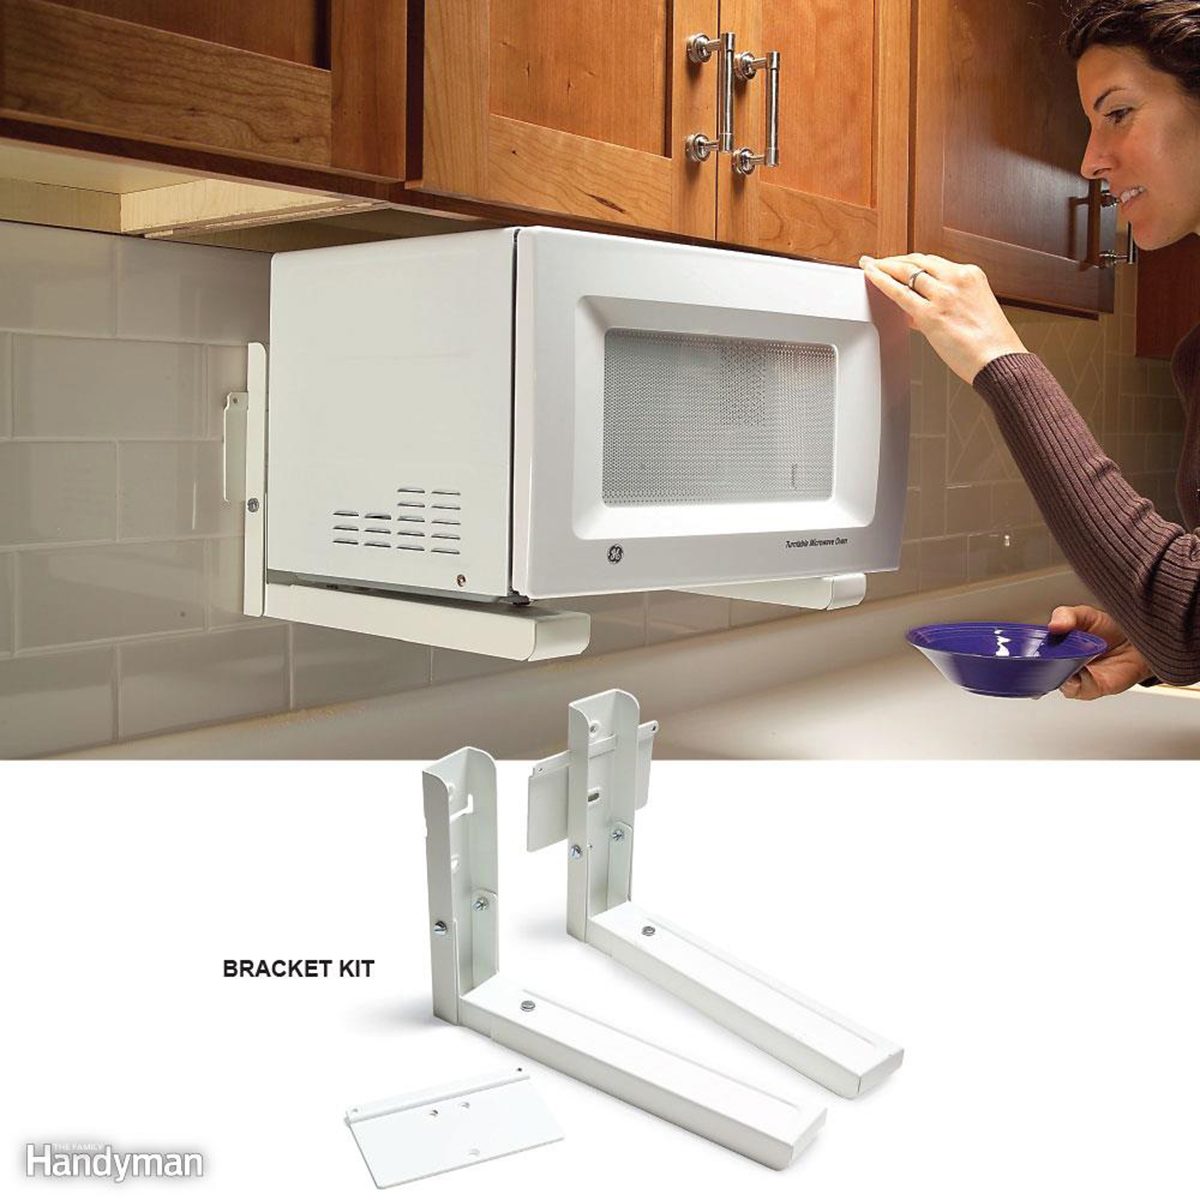 Installing microwave over the counter